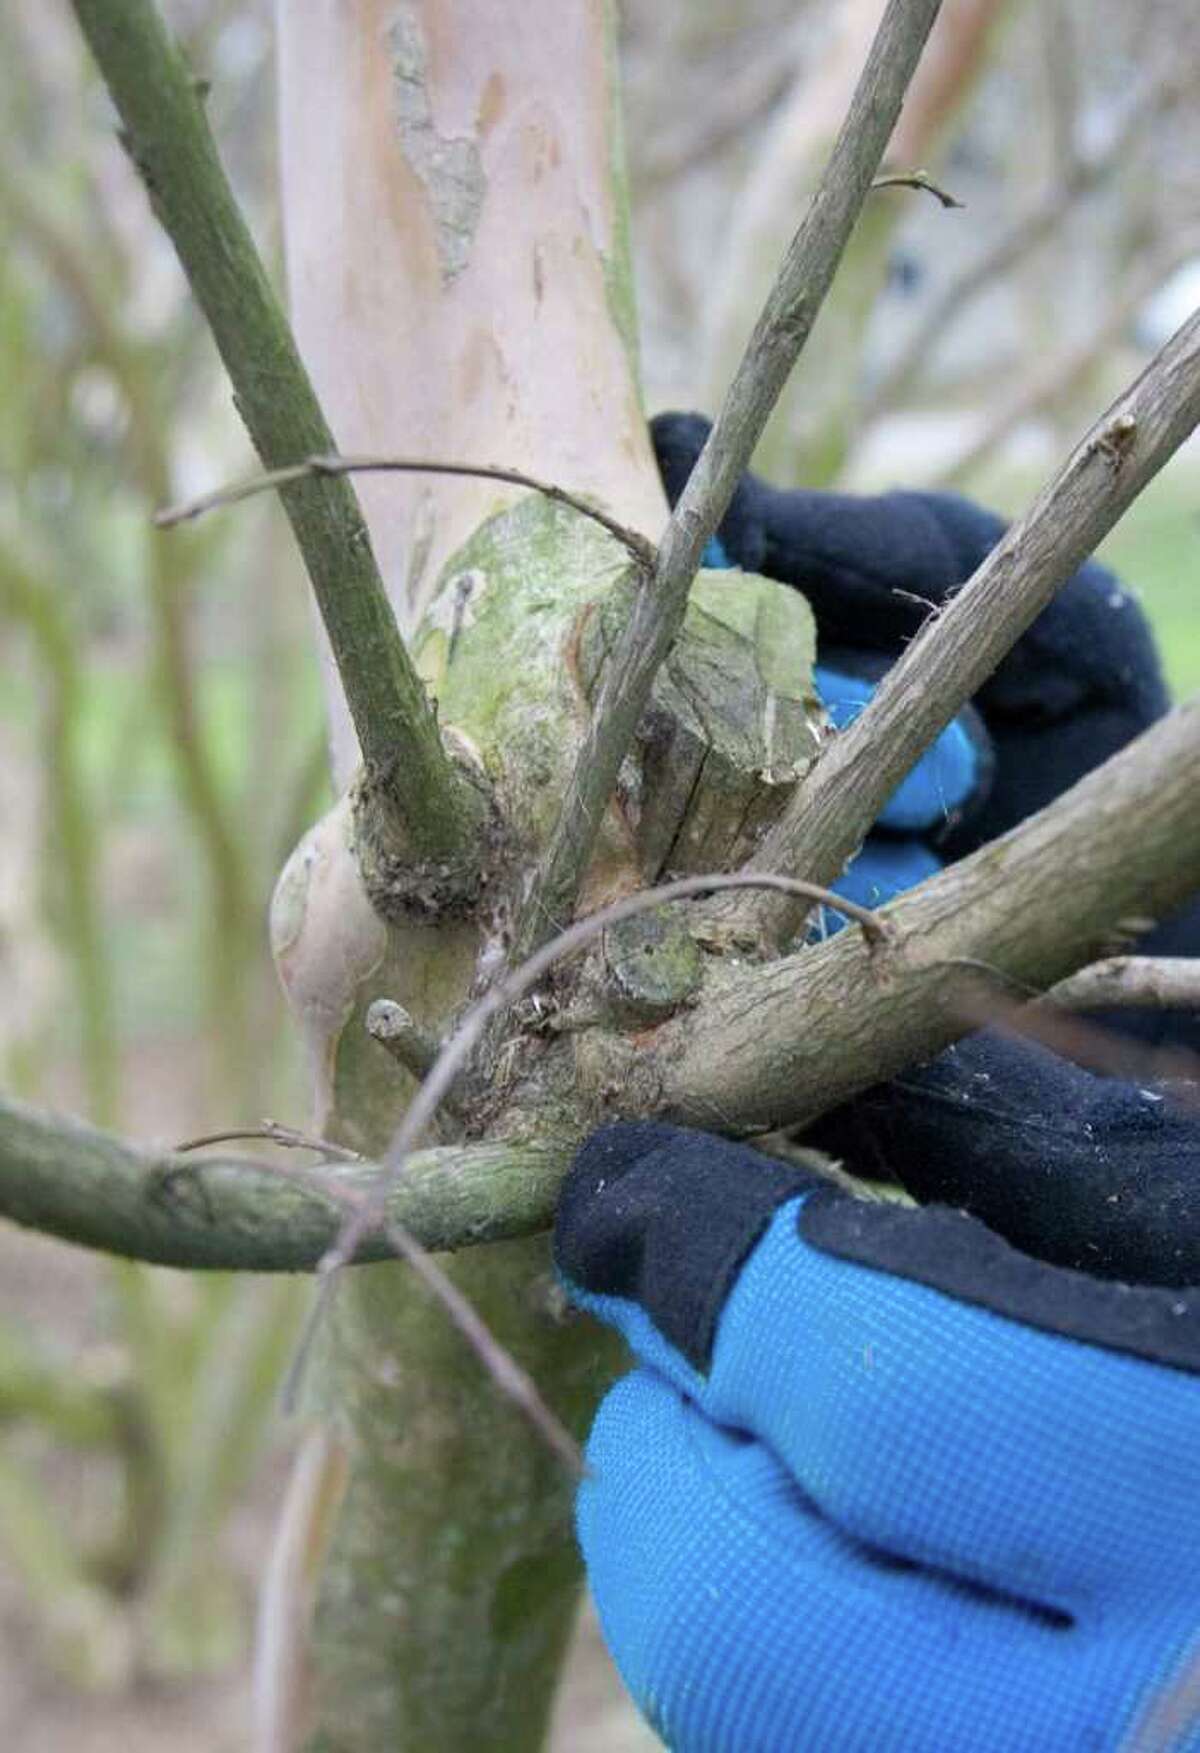 archiveplease To deal with this unwanted proliferation of growth, select three stems located equal distance around the stem; leave those three stems and use bypass pruners to remove the remaining stems. Do not use pruning paint or wound dressing on the tree. (Dave Bowman/Newport News Daily Press/MCT)